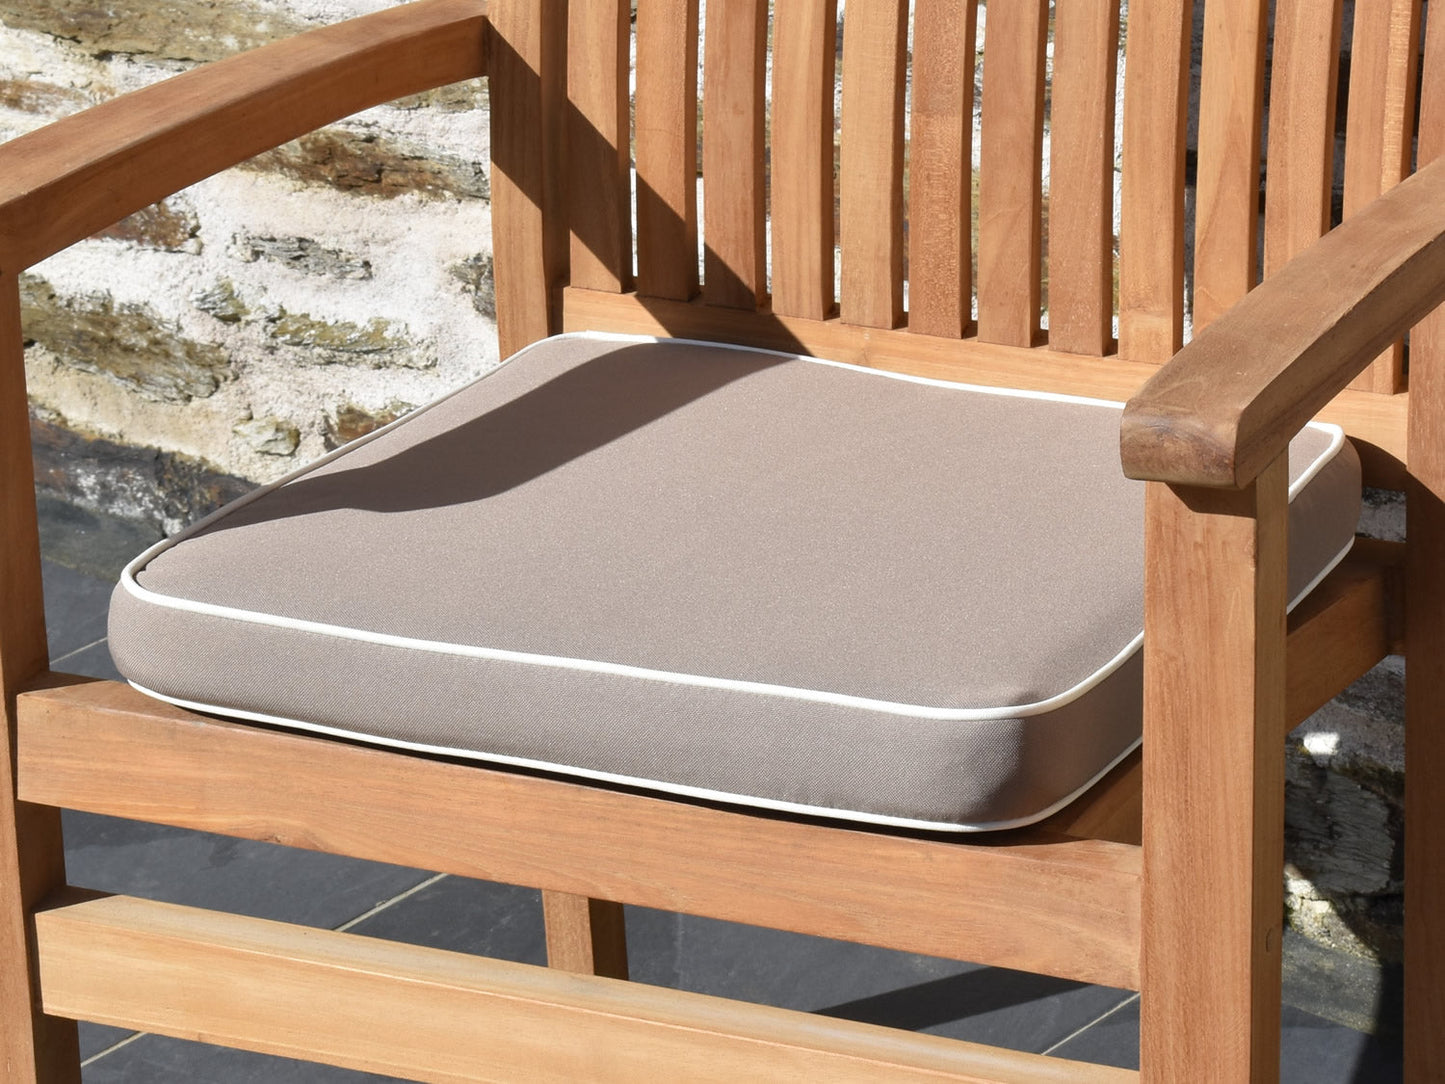 Luxury large outdoor garden seat pad, Taupe with White piping, close view